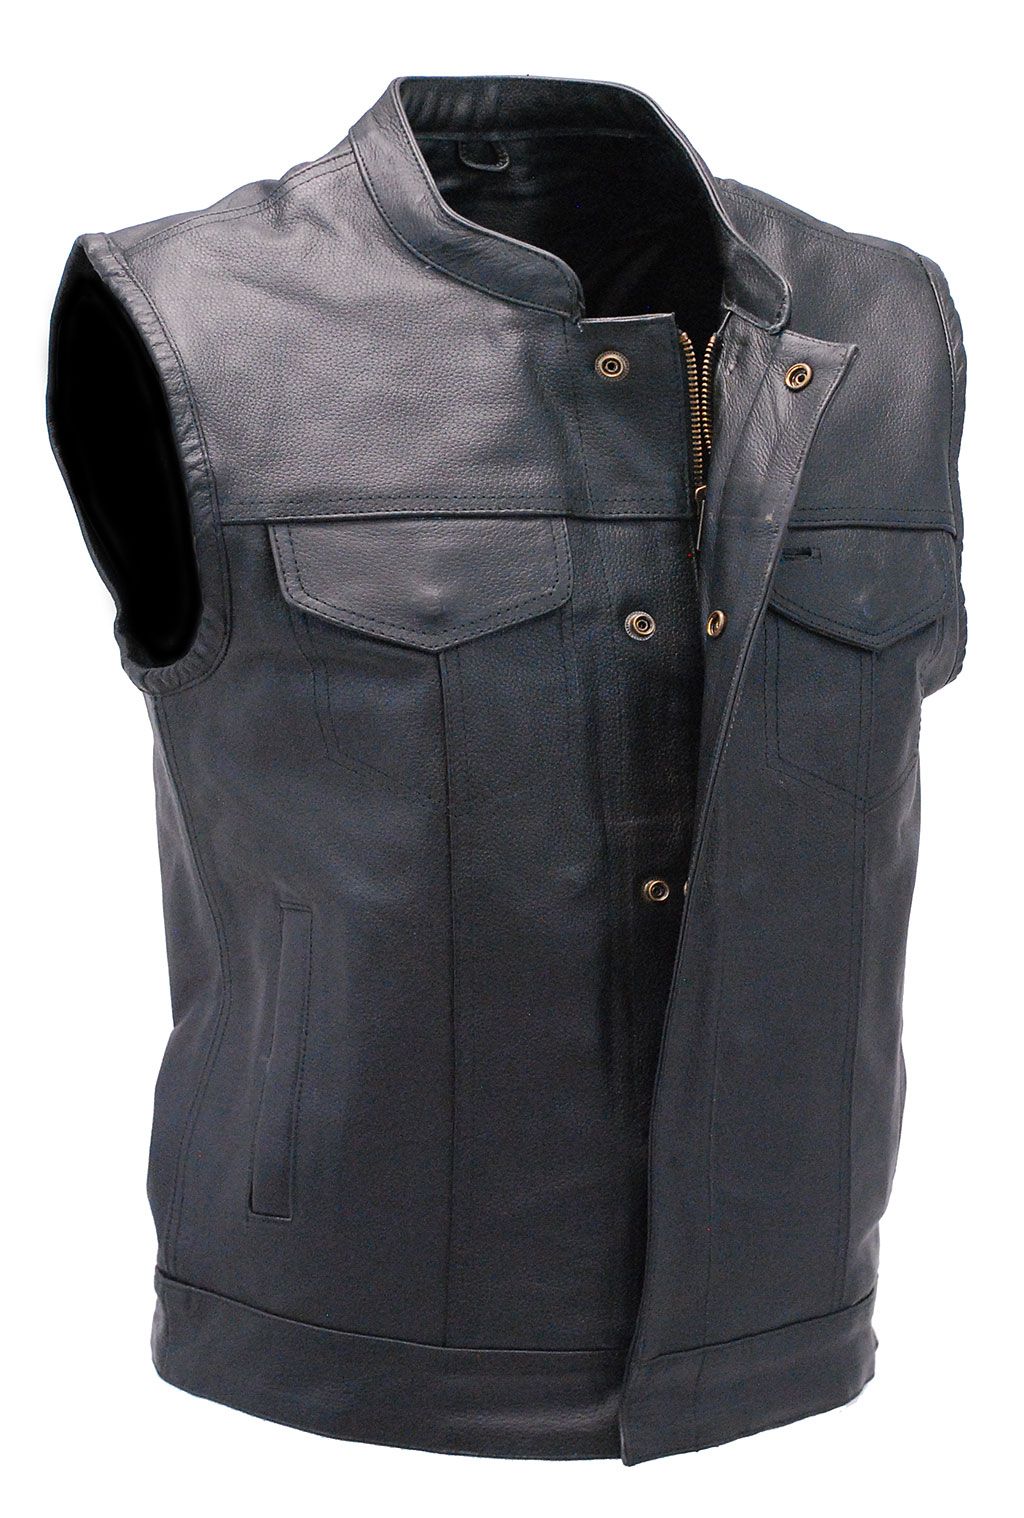 Motorcycle club vest with front zipper and snap flap, dual CCW pockets and a one hidden easy access pocket between the zipper and snap flap.